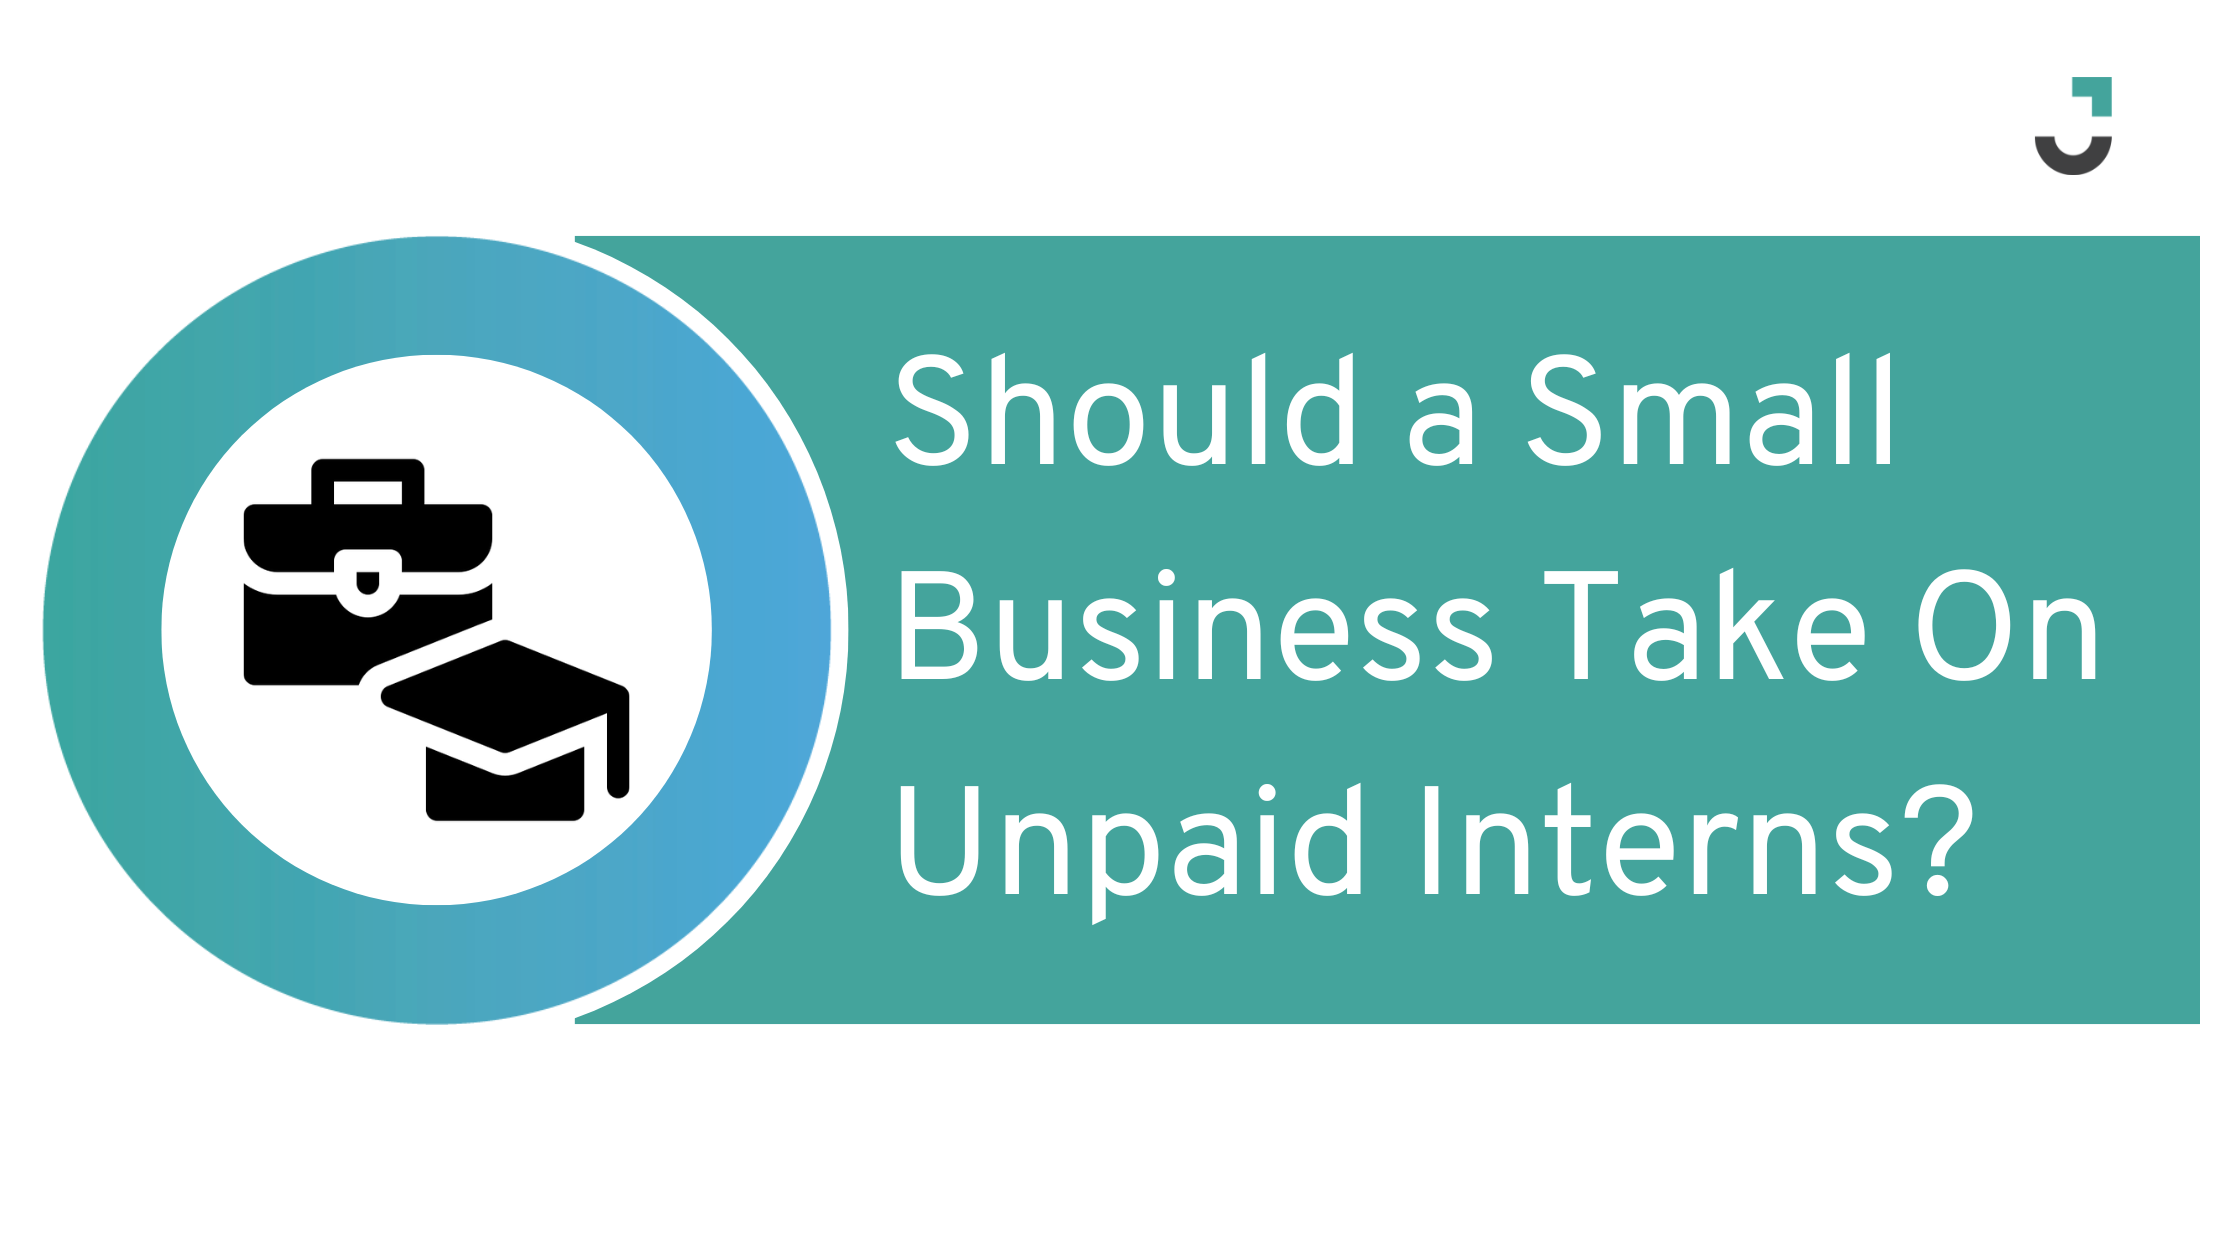 Should a Small Business Take On Unpaid Interns?